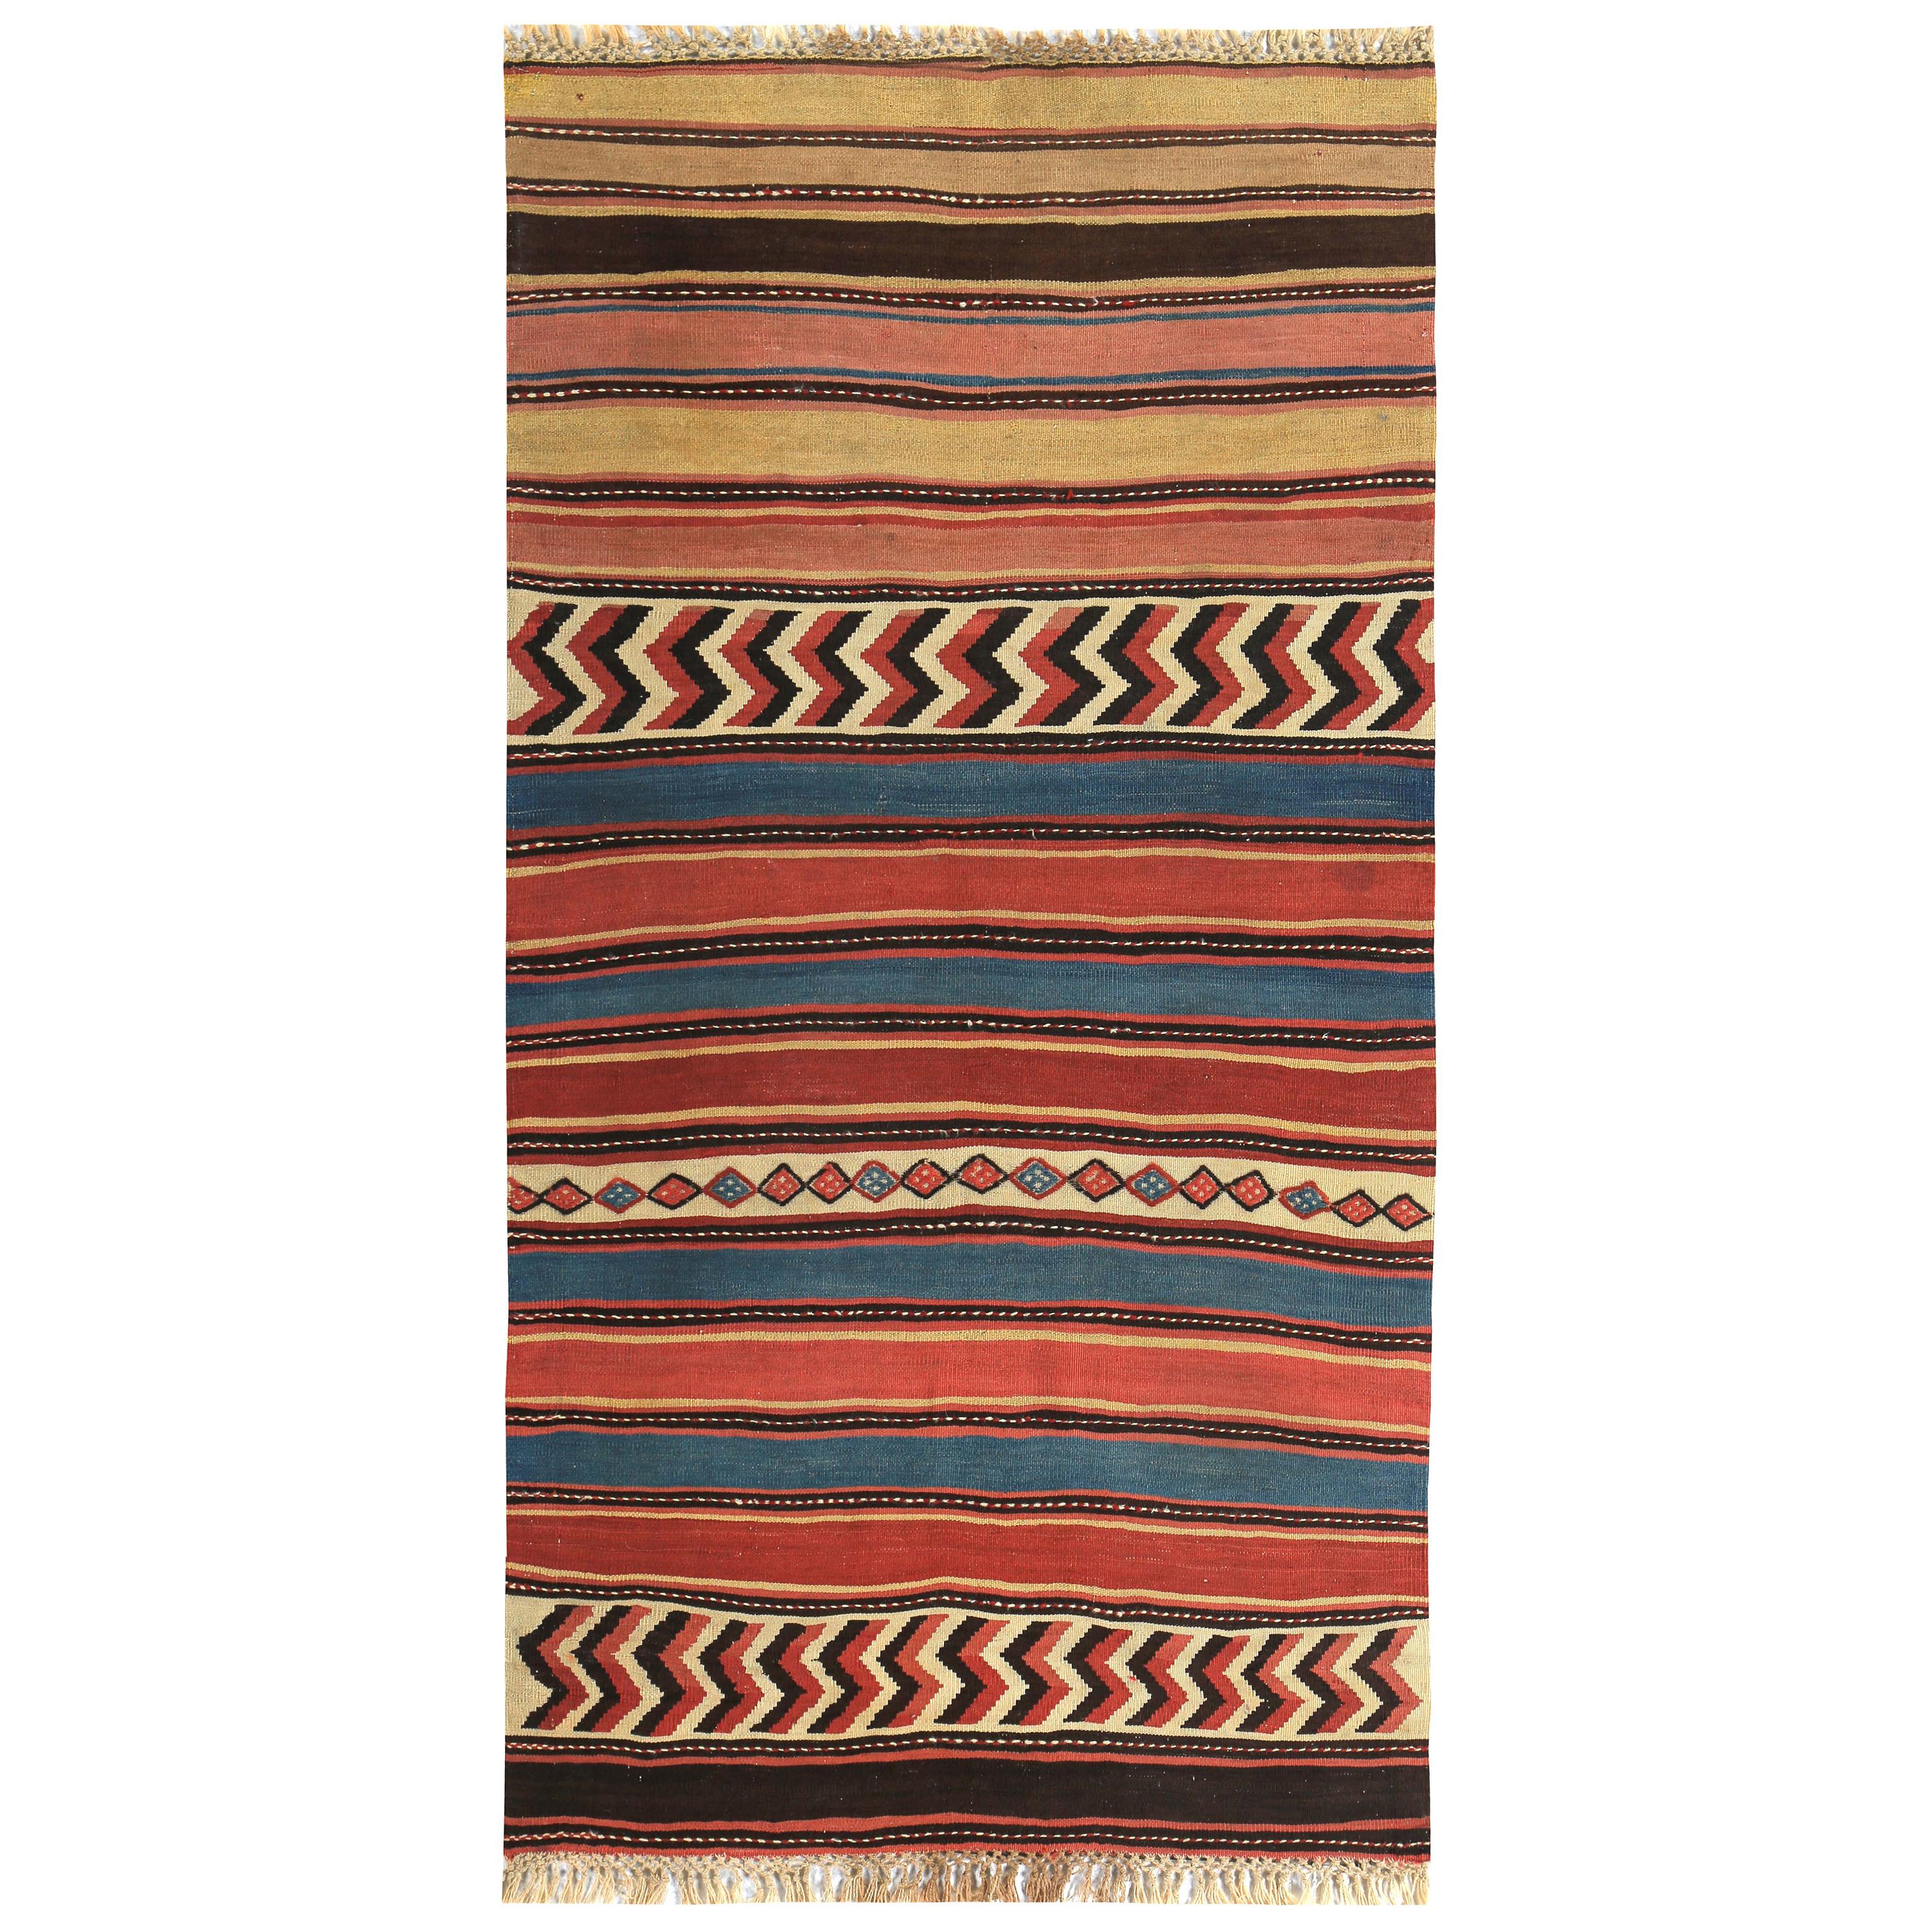 Modern Turkish Kilim Rug with Red and Blue Tribal Design on Beige Field For Sale